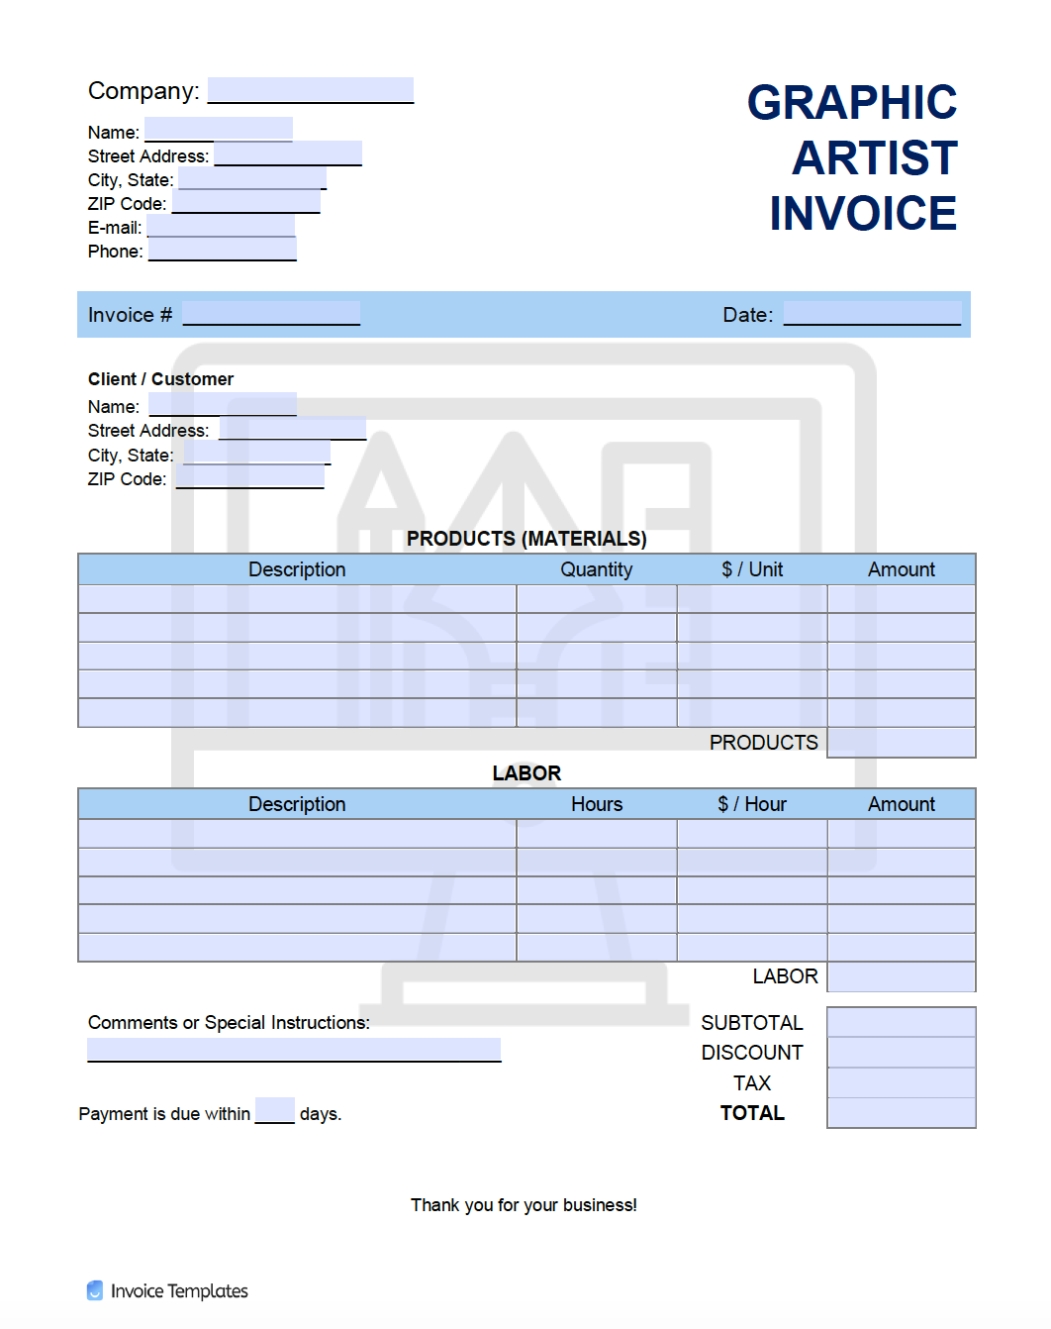 Free Graphic Artist Invoice Template | Pdf | Word | Excel With Graphic Design Invoice Template Pdf